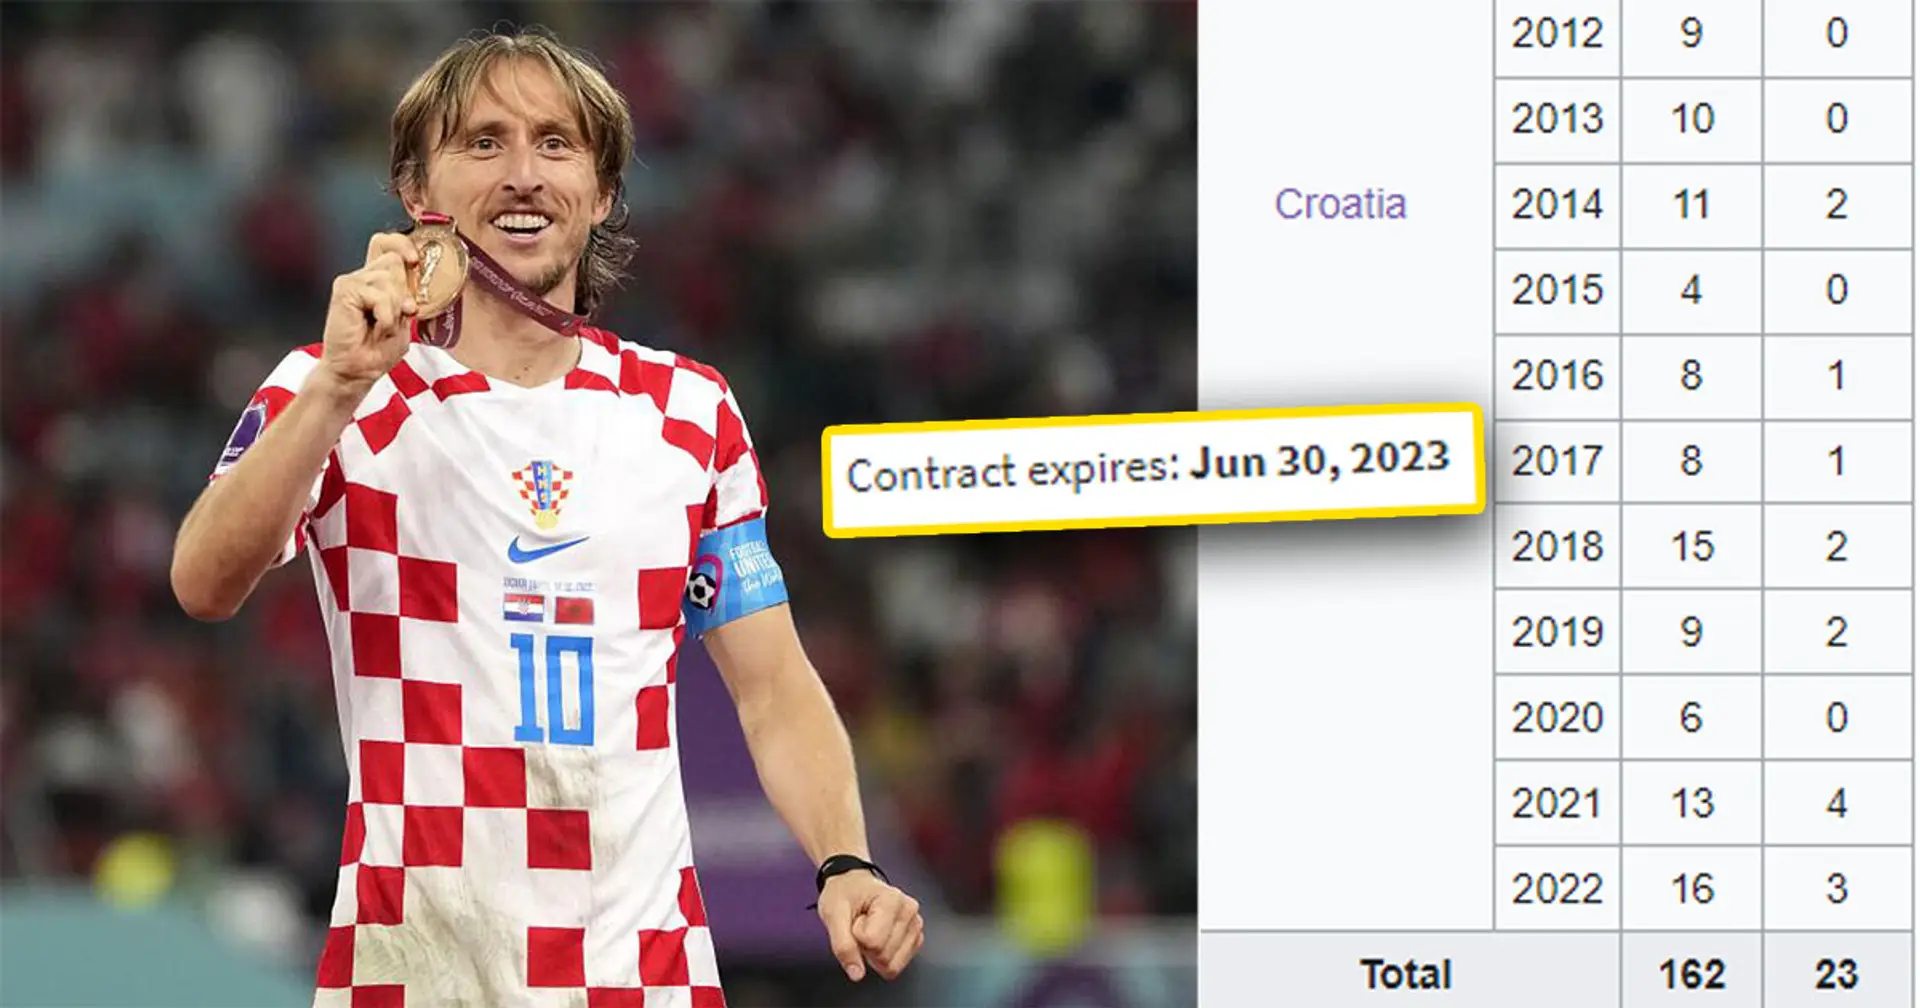 Madrid 'don't understand' why Modric hasn't retired from national team as they're undecided on new deal